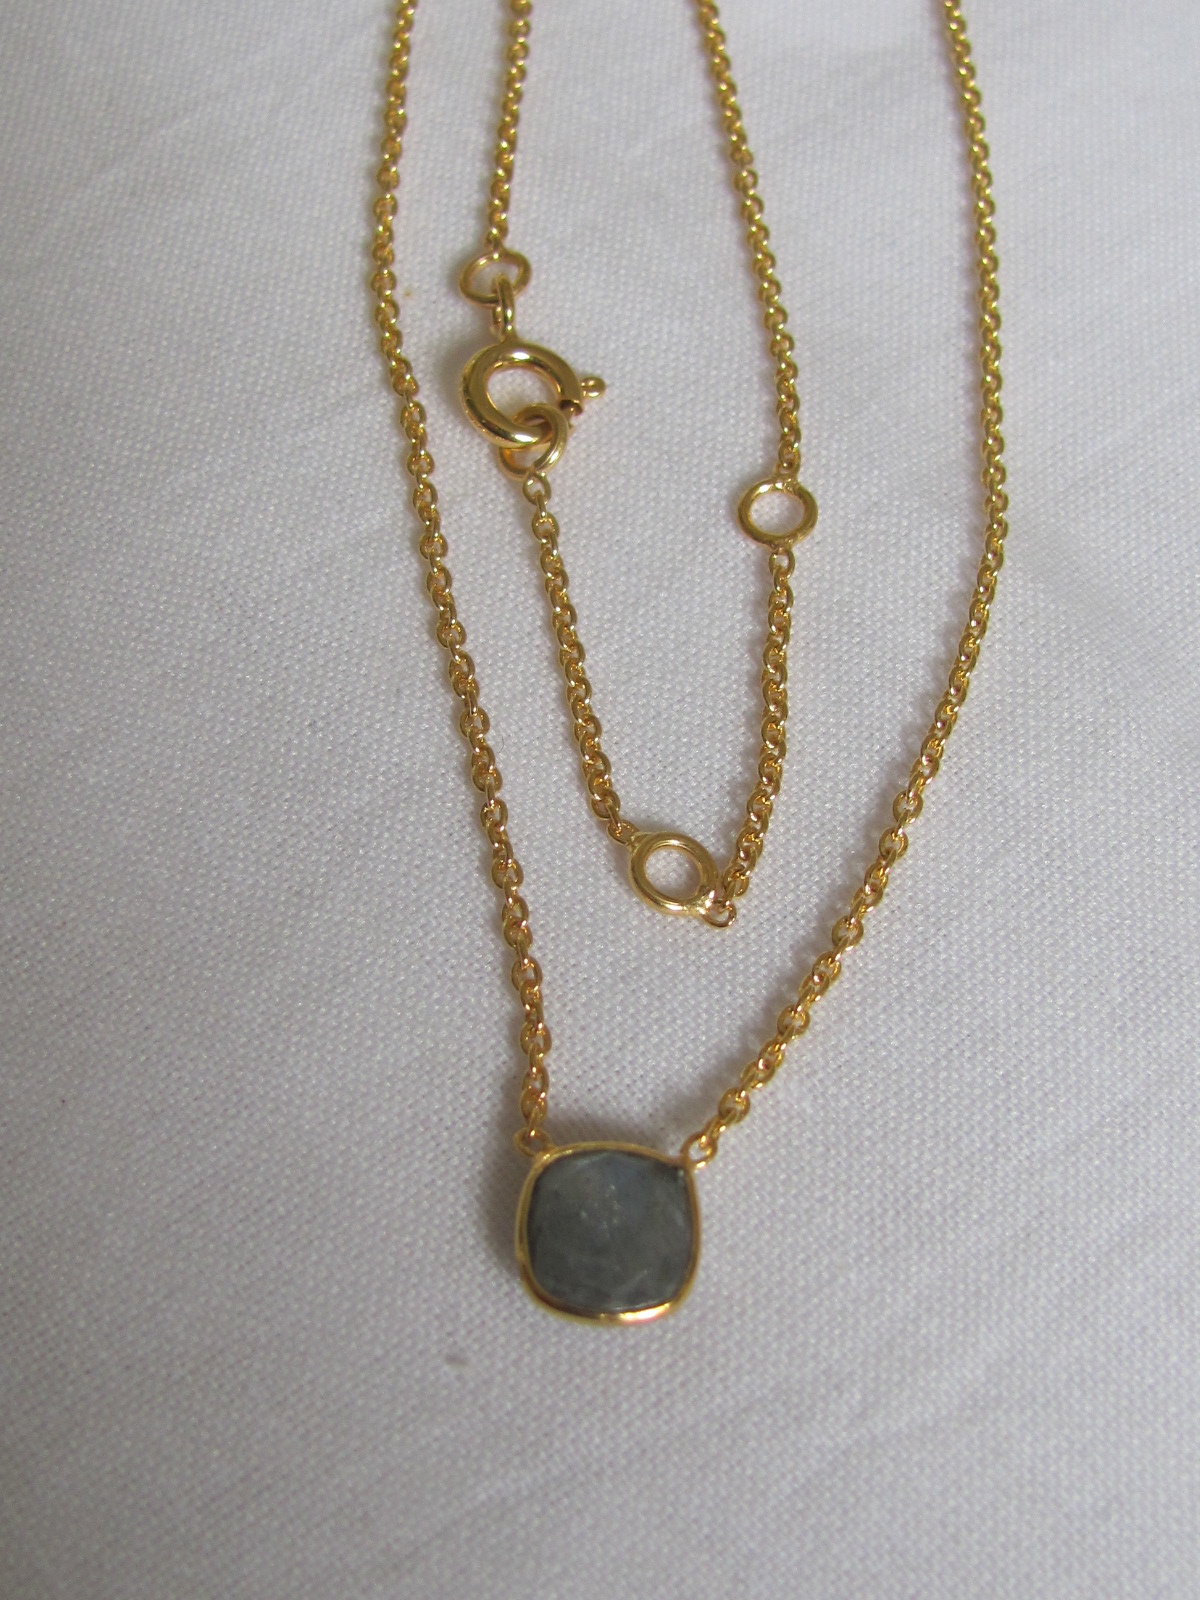 Necklace gold on silver with labradorite